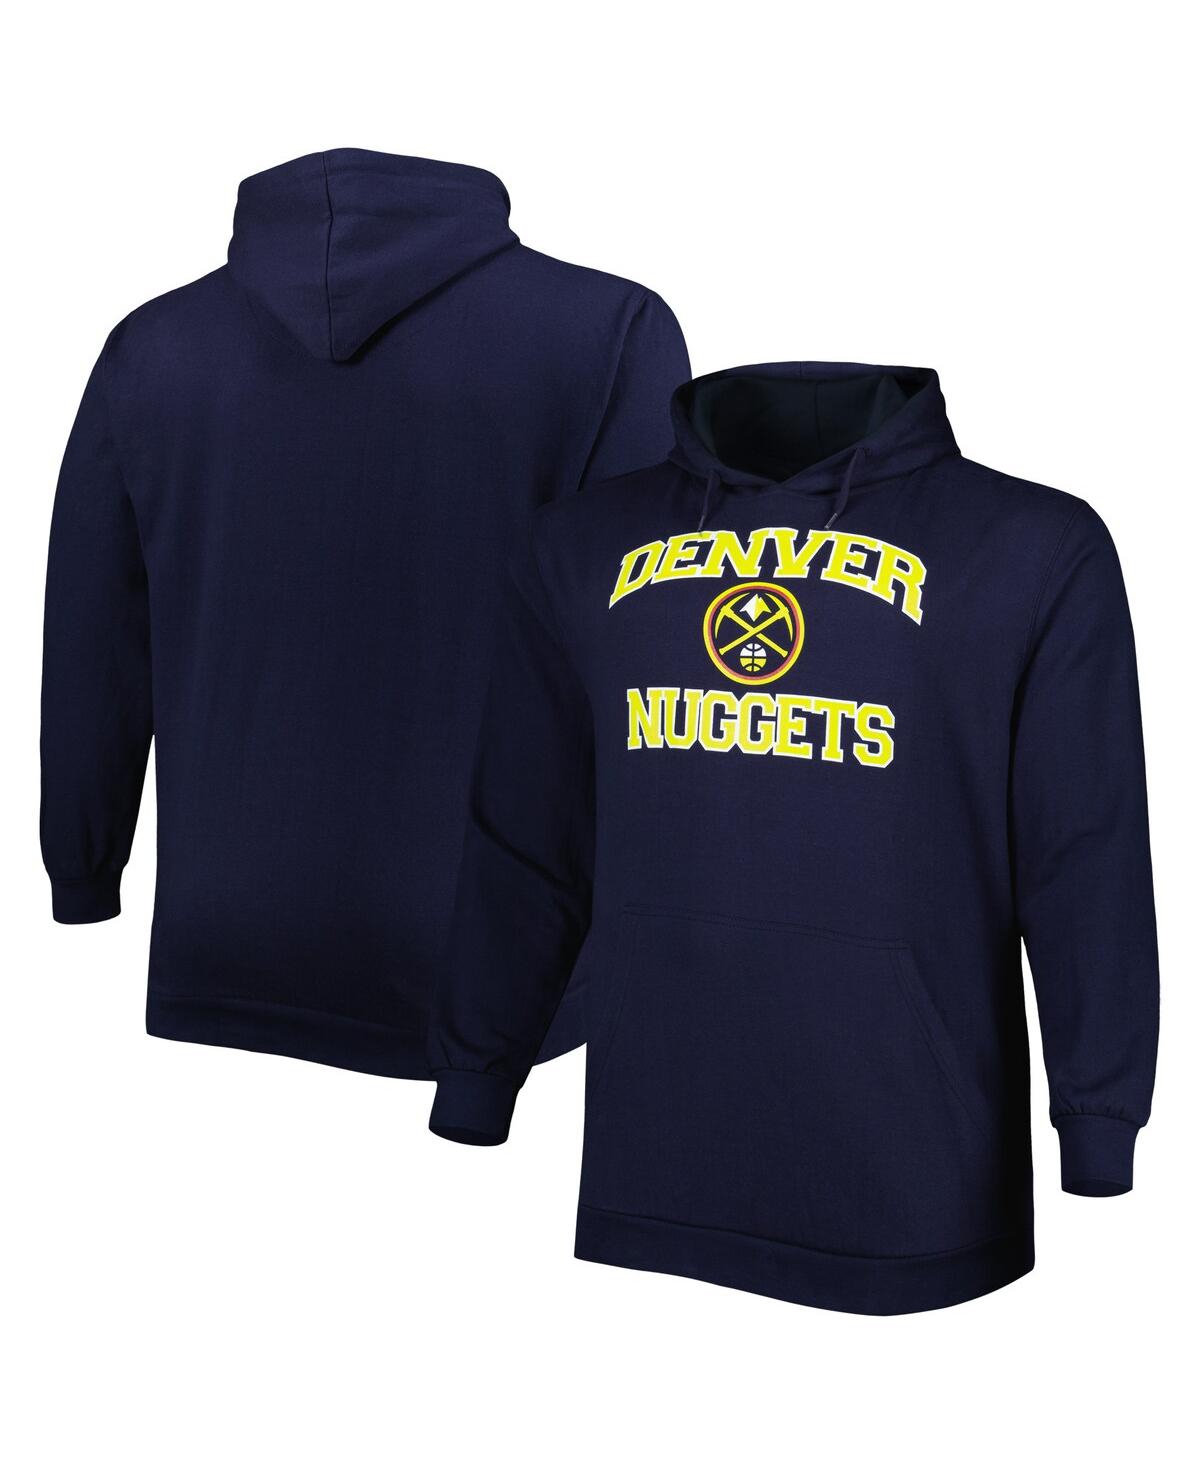 Men's Navy Denver Nuggets Big and Tall Heart and Soul Pullover Hoodie - Navy